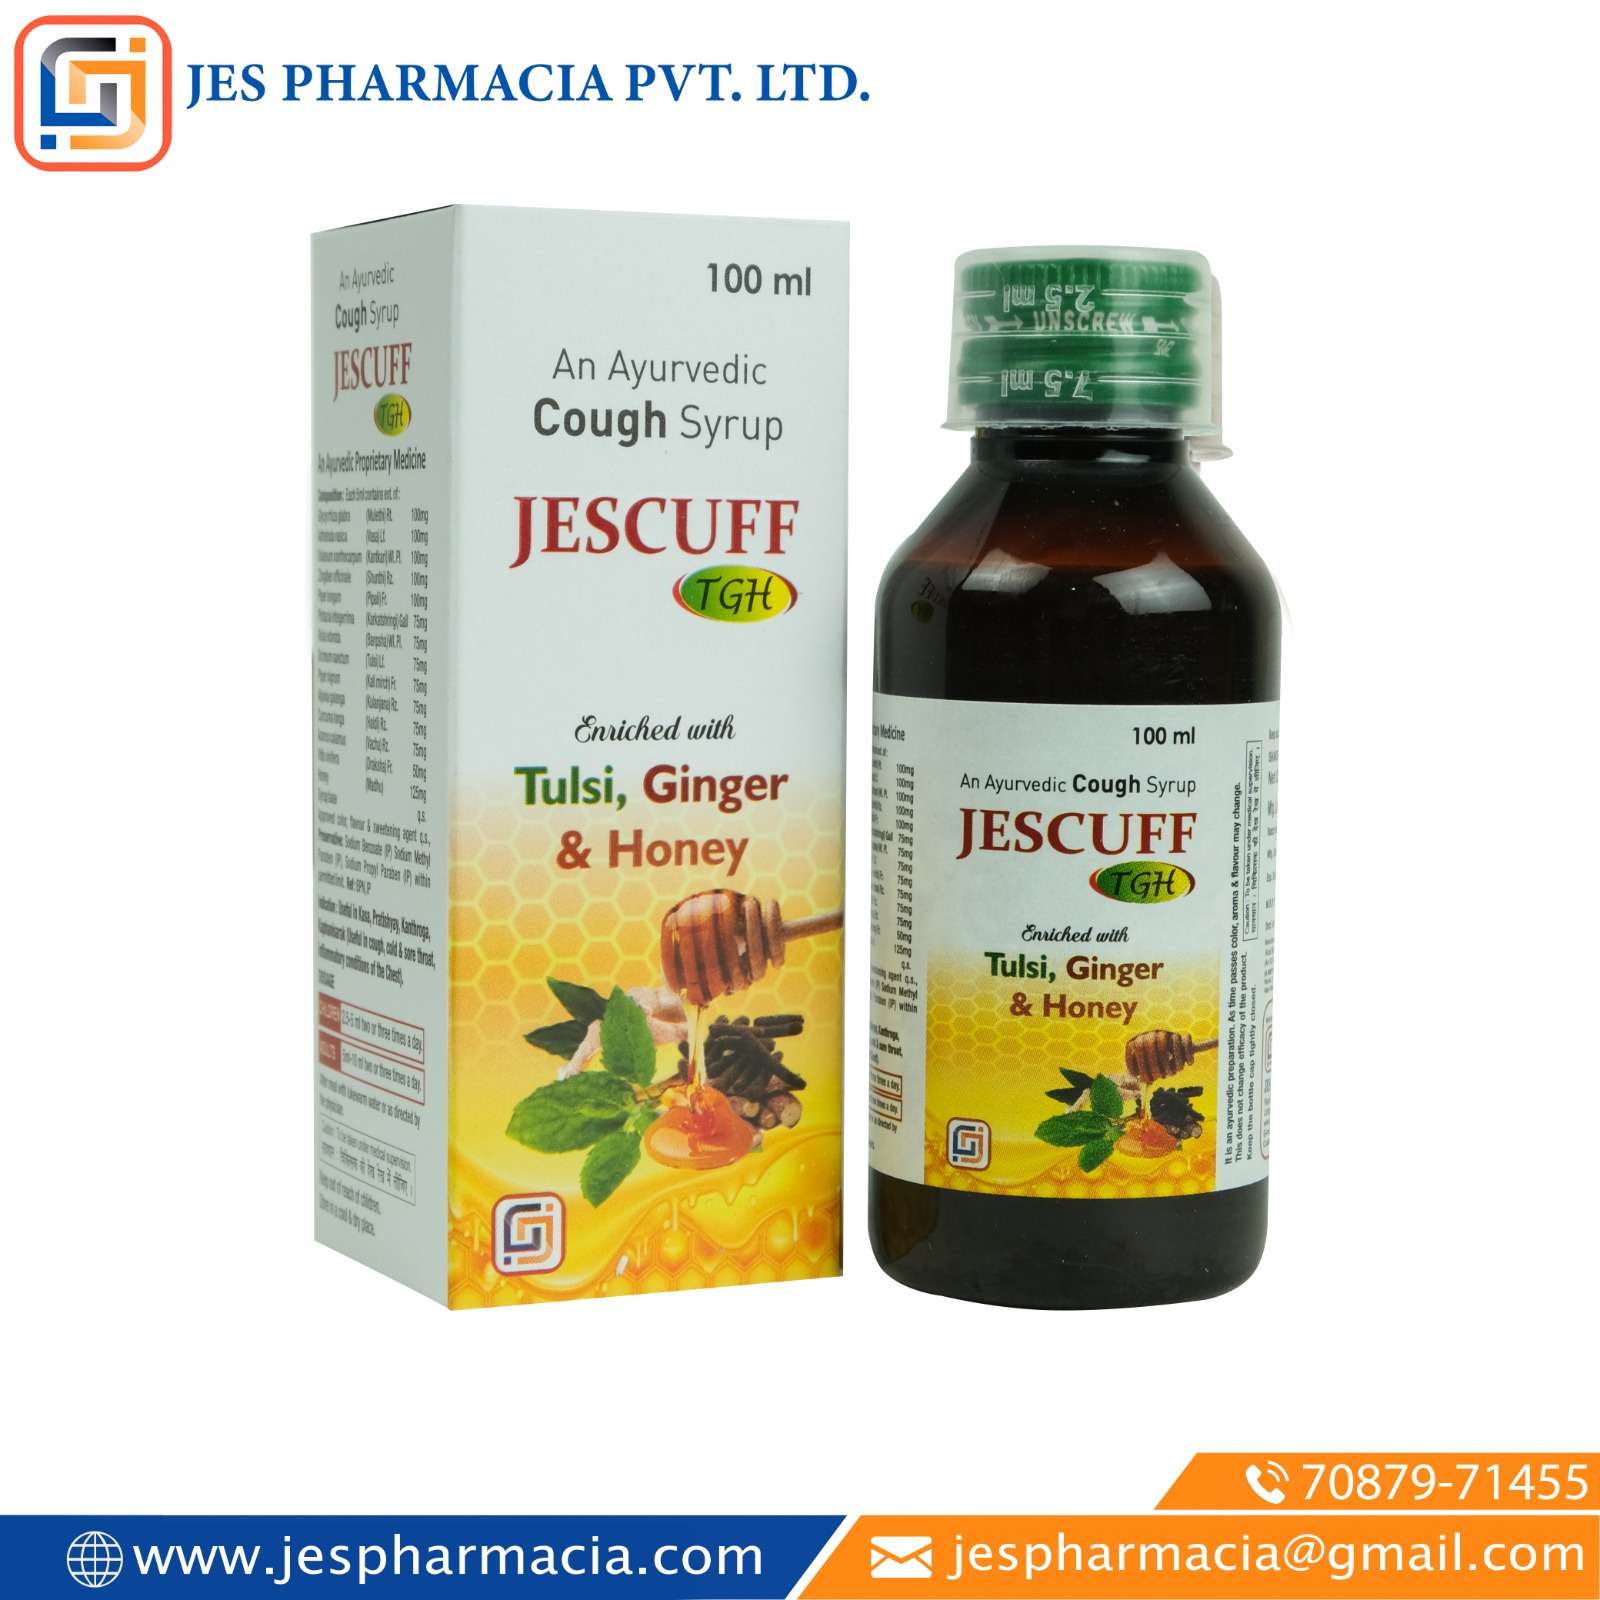 an ayurvedic cough syrup enriched with tulsi, ginger & honey